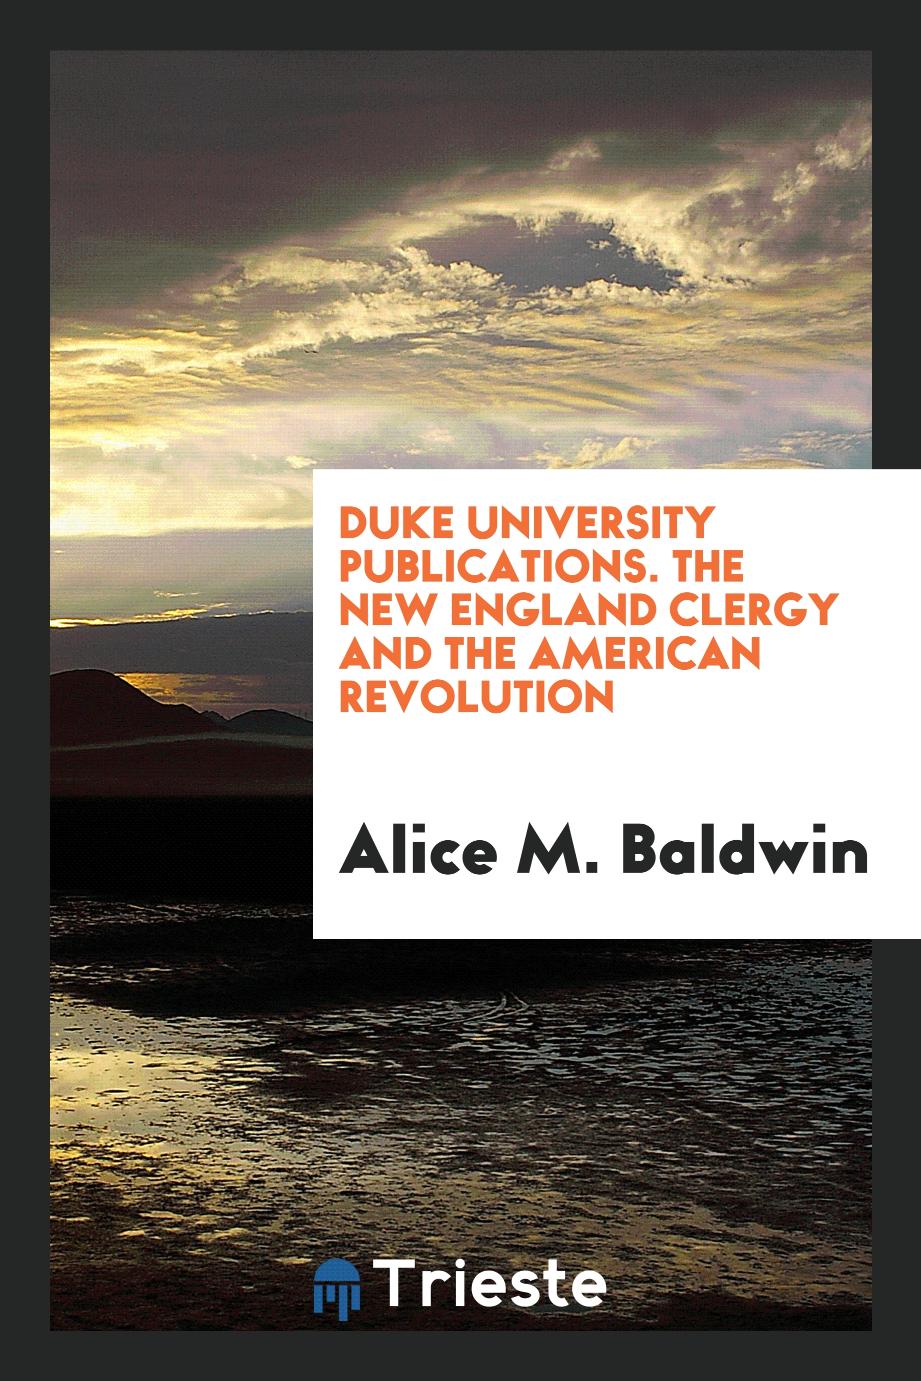 Duke University Publications. The New England Clergy and the American Revolution